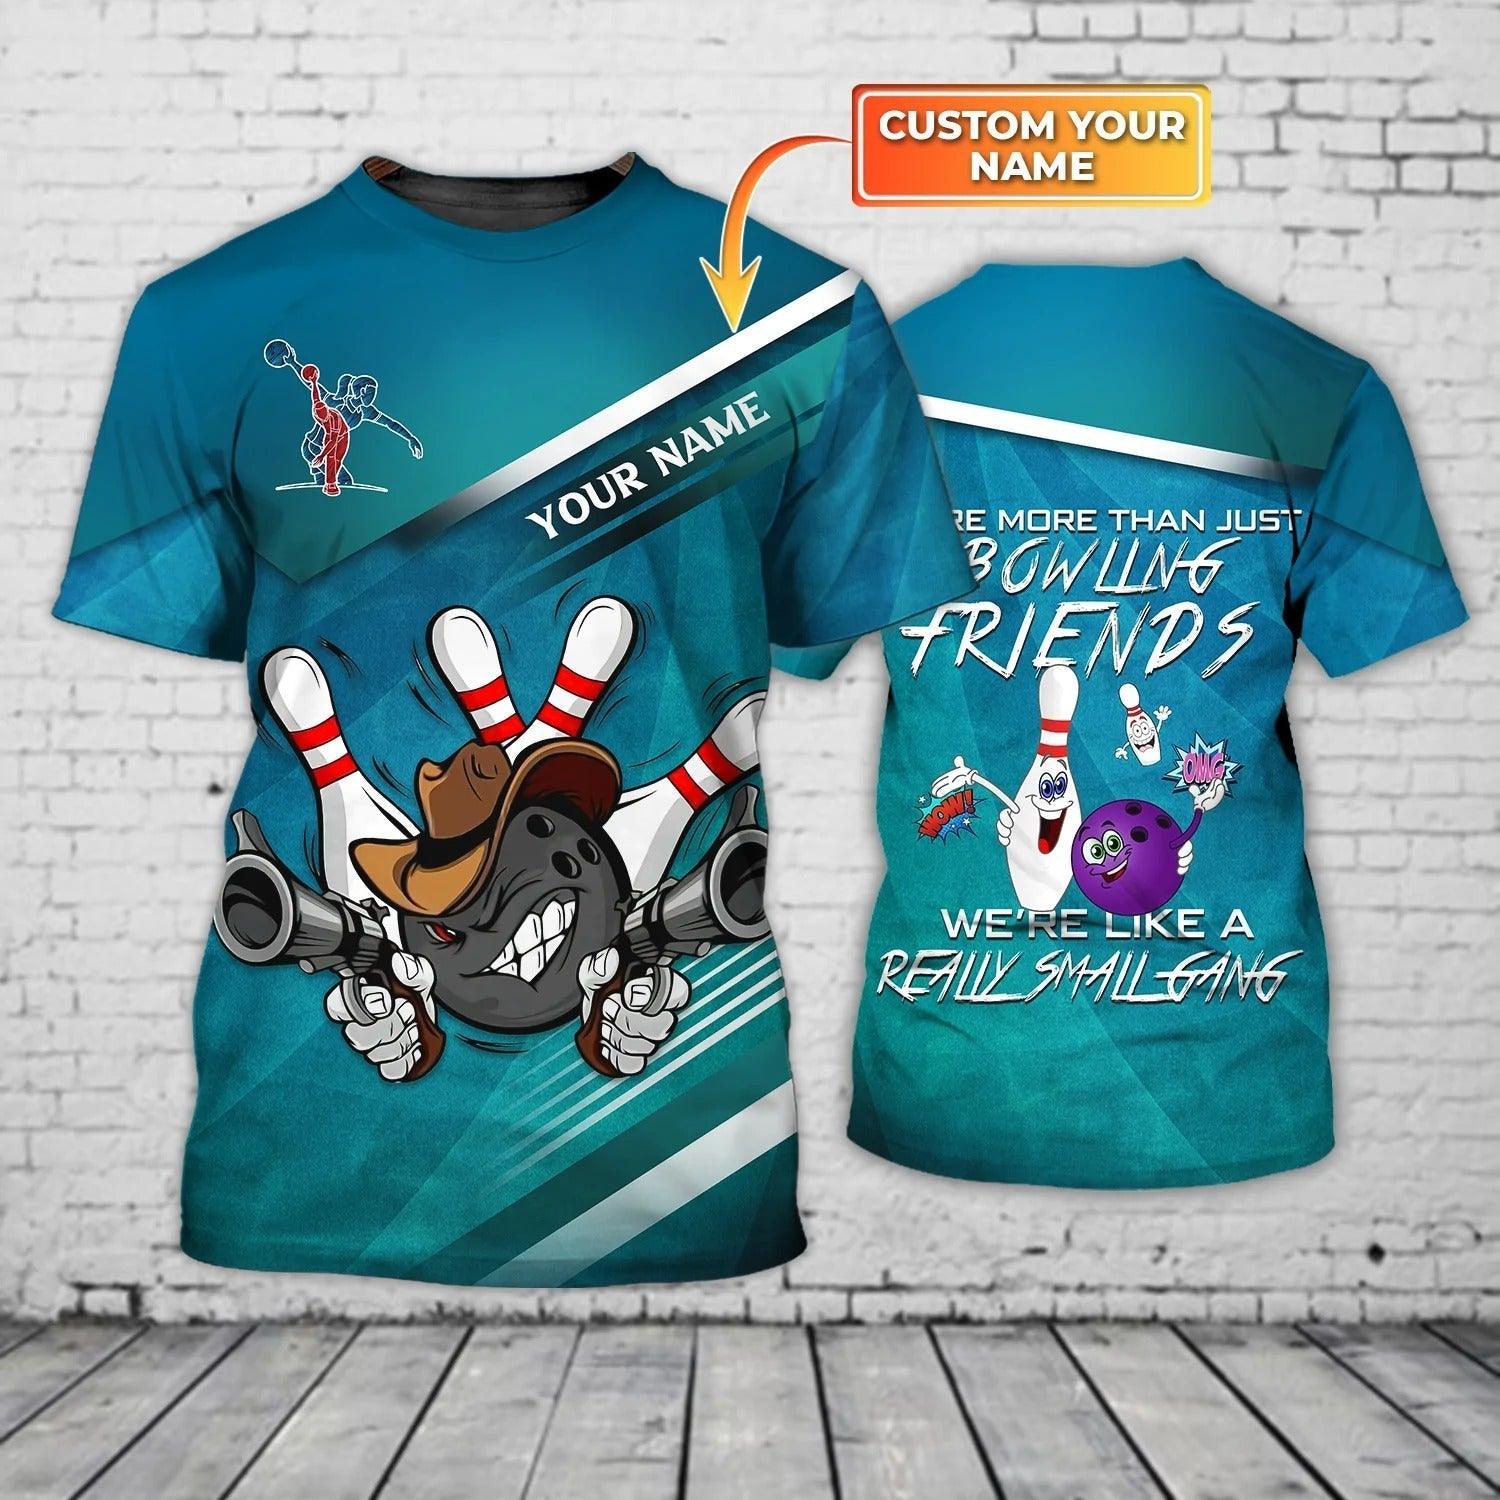 Customized Name Bowling T Shirt, Personalized Bowling Friend T Shirt, Bowling Team Uniform Shirts - Perfect Gift For Men, Bowling Players, Bowlers - Amzanimalsgift